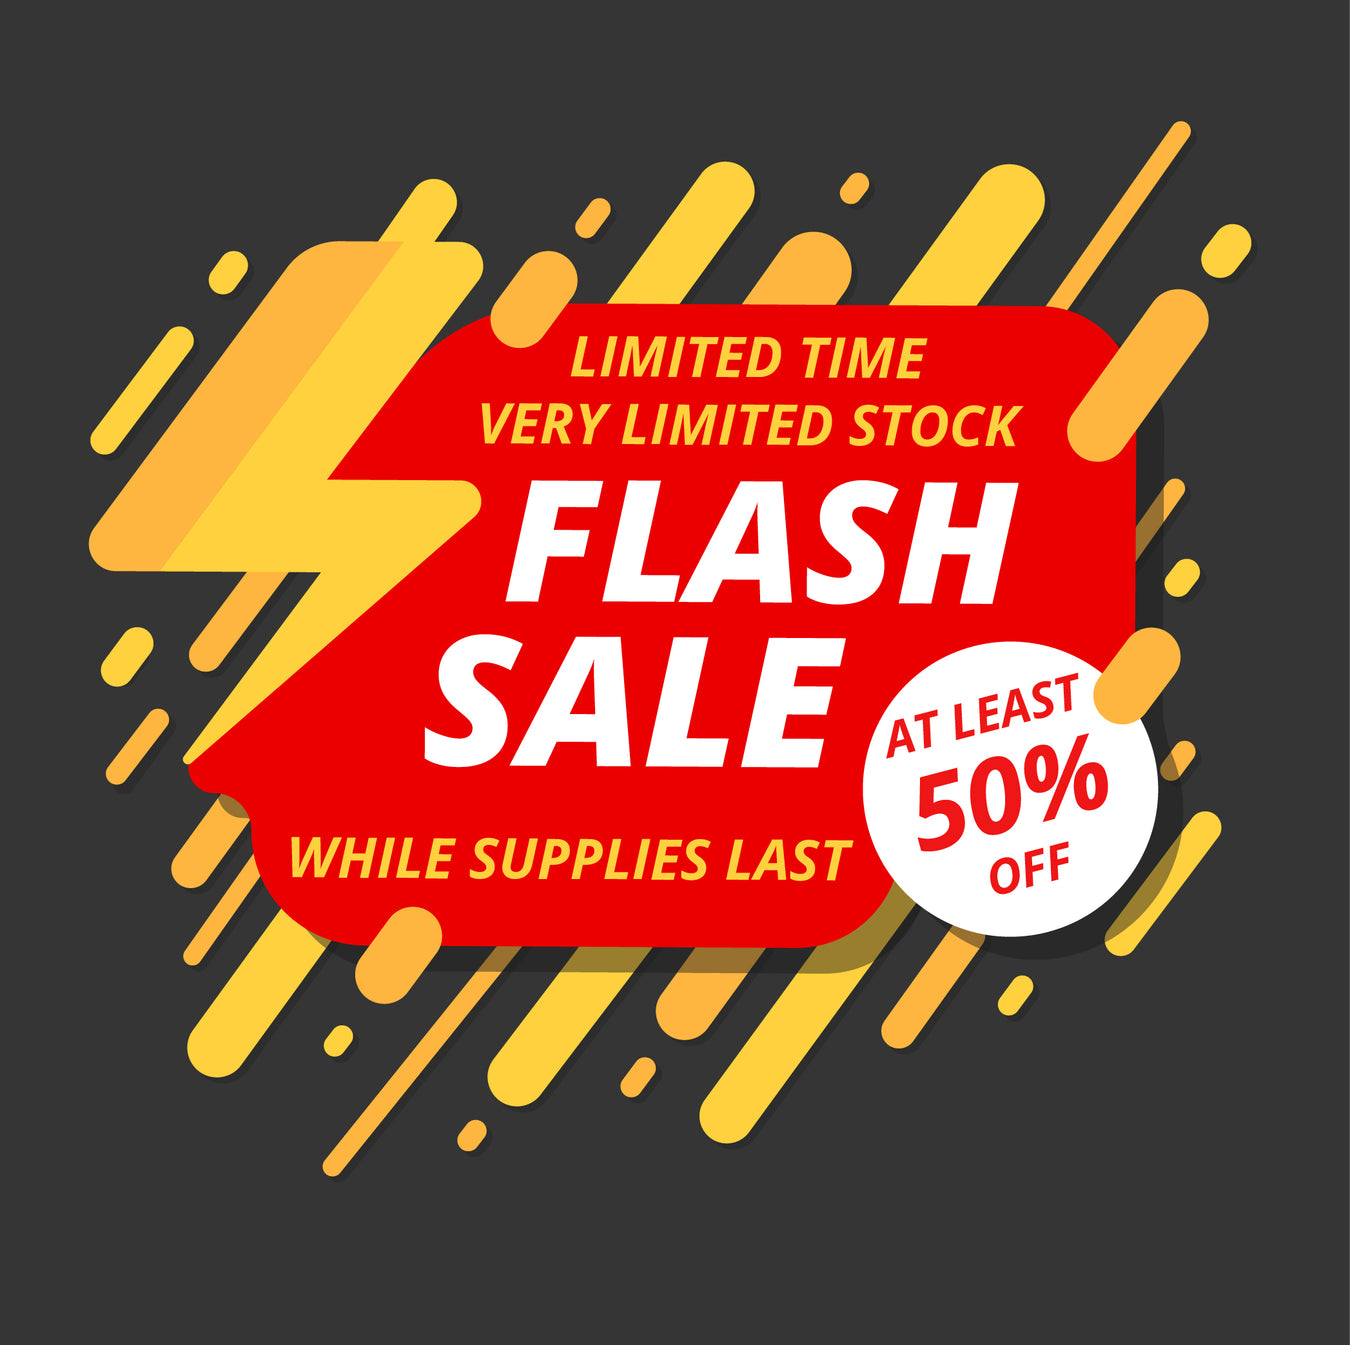 flash sale--at least 50% off